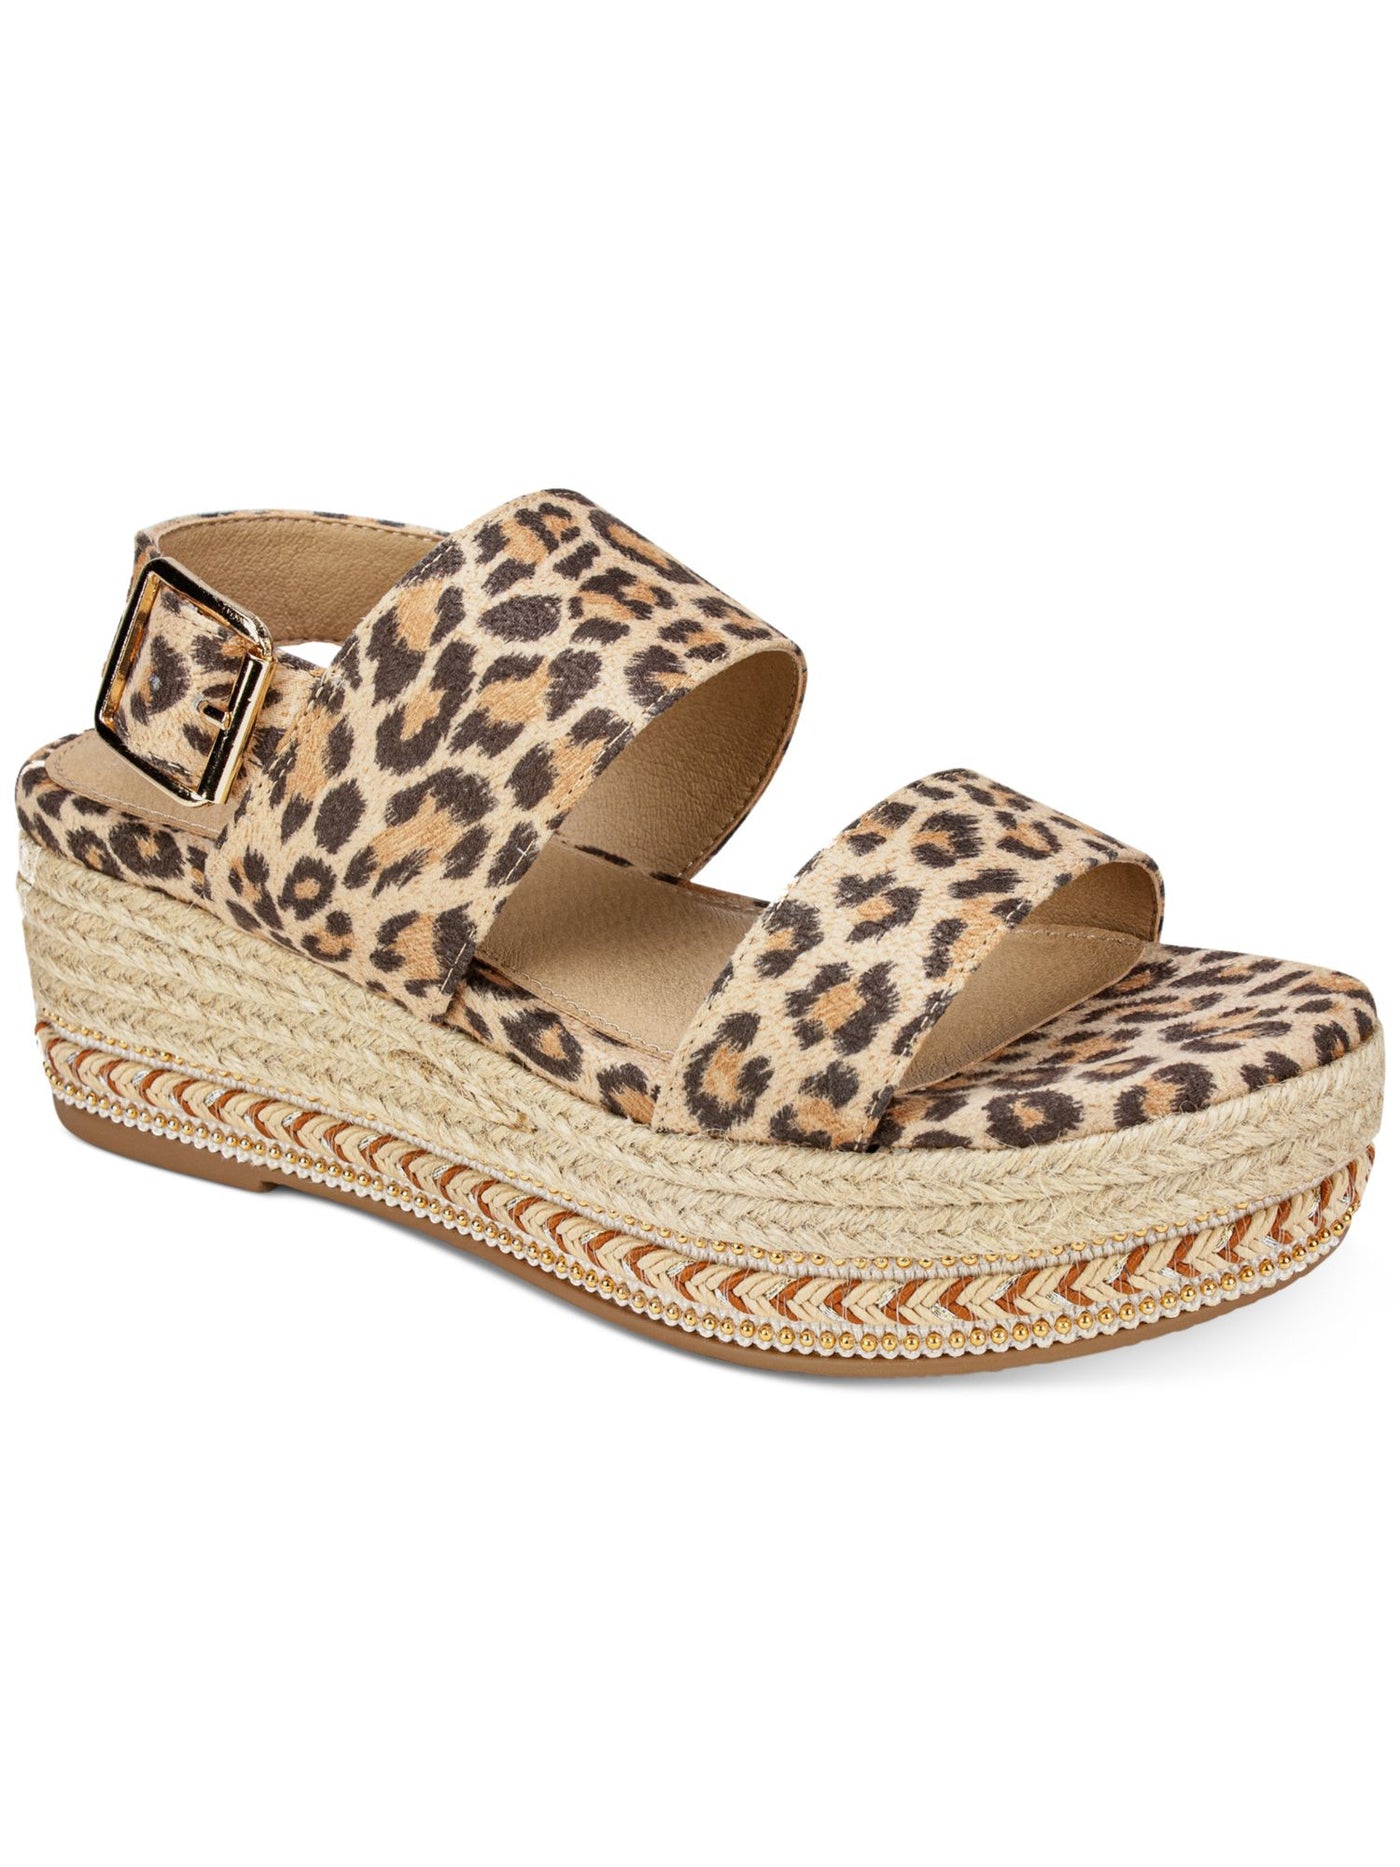 SEVEN DIALS Womens Beige Leopard Print 1-1/2" Platform Beaded Braided Accent Slingback Adjustable Strap Cushioned Leawood Round Toe Wedge Buckle Espadrille Shoes 5.5 M